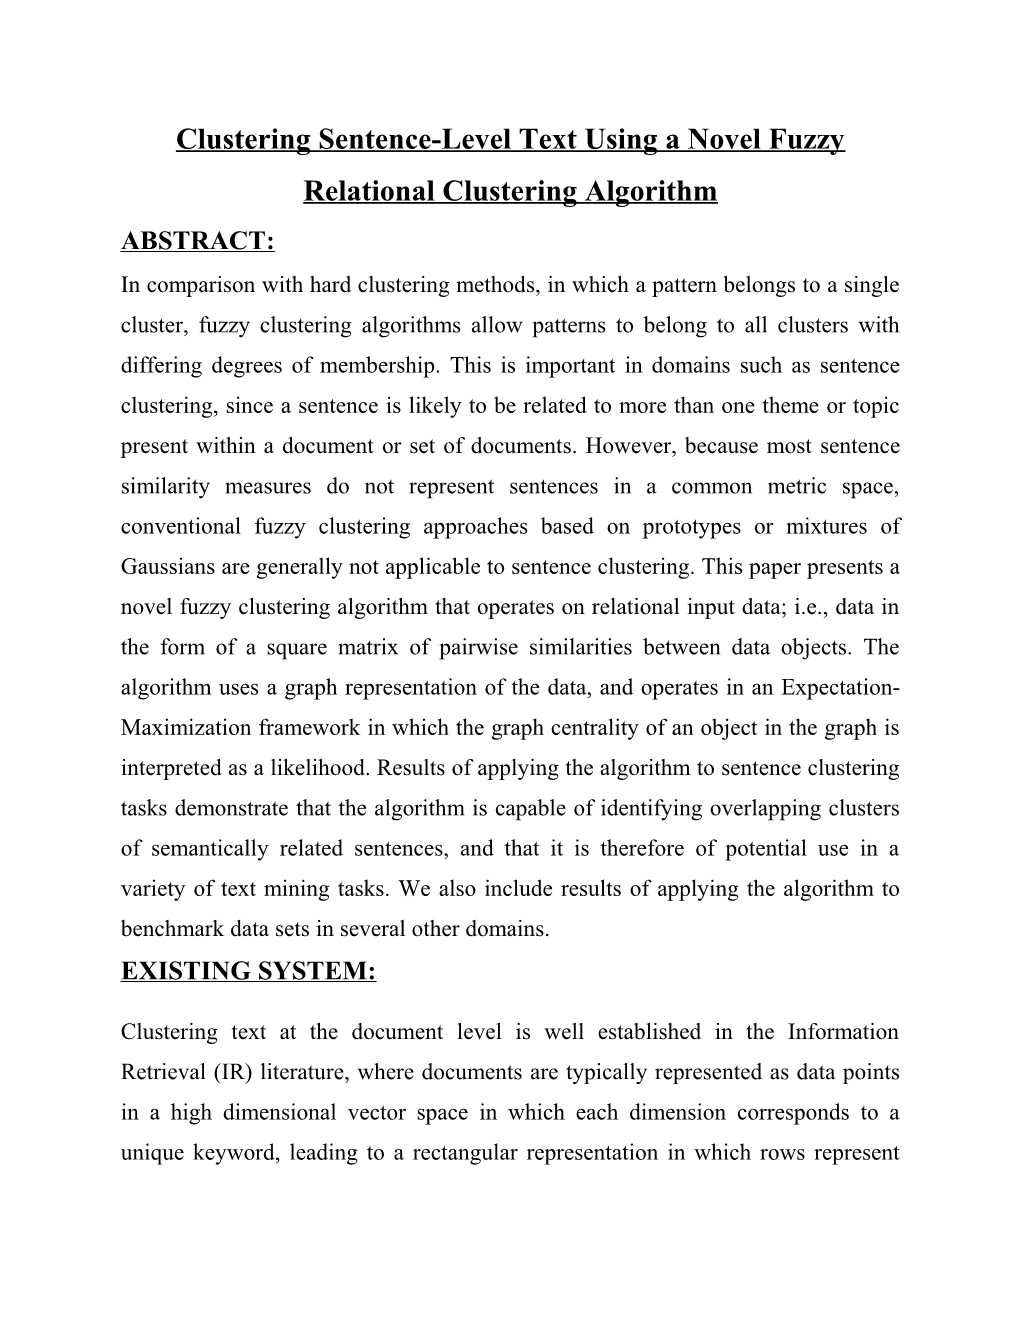 Clustering Sentence-Level Text Using a Novelfuzzy Relational Clustering Algorithm